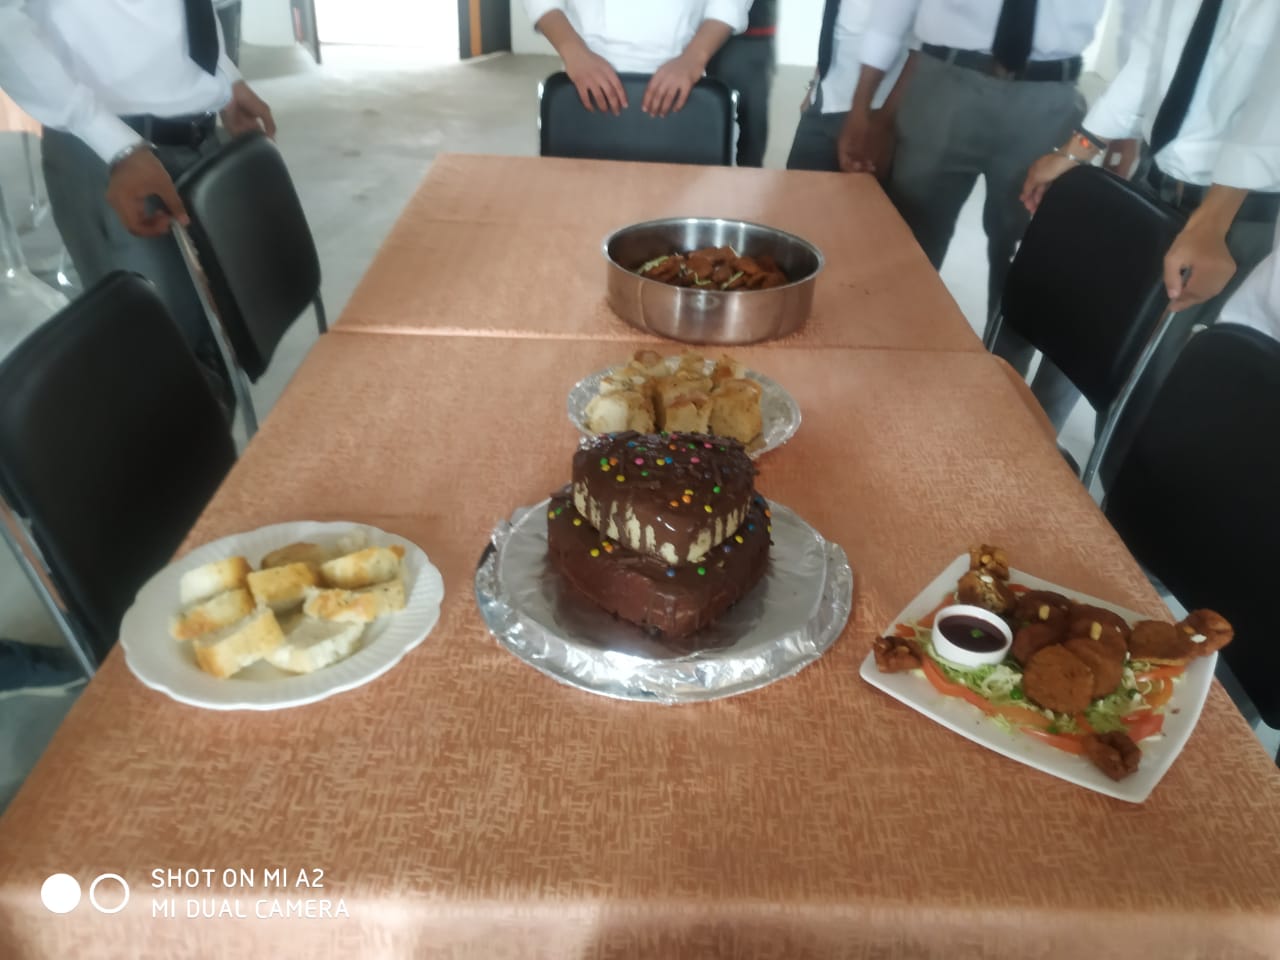 Chef's International Day Celebrations in allied college